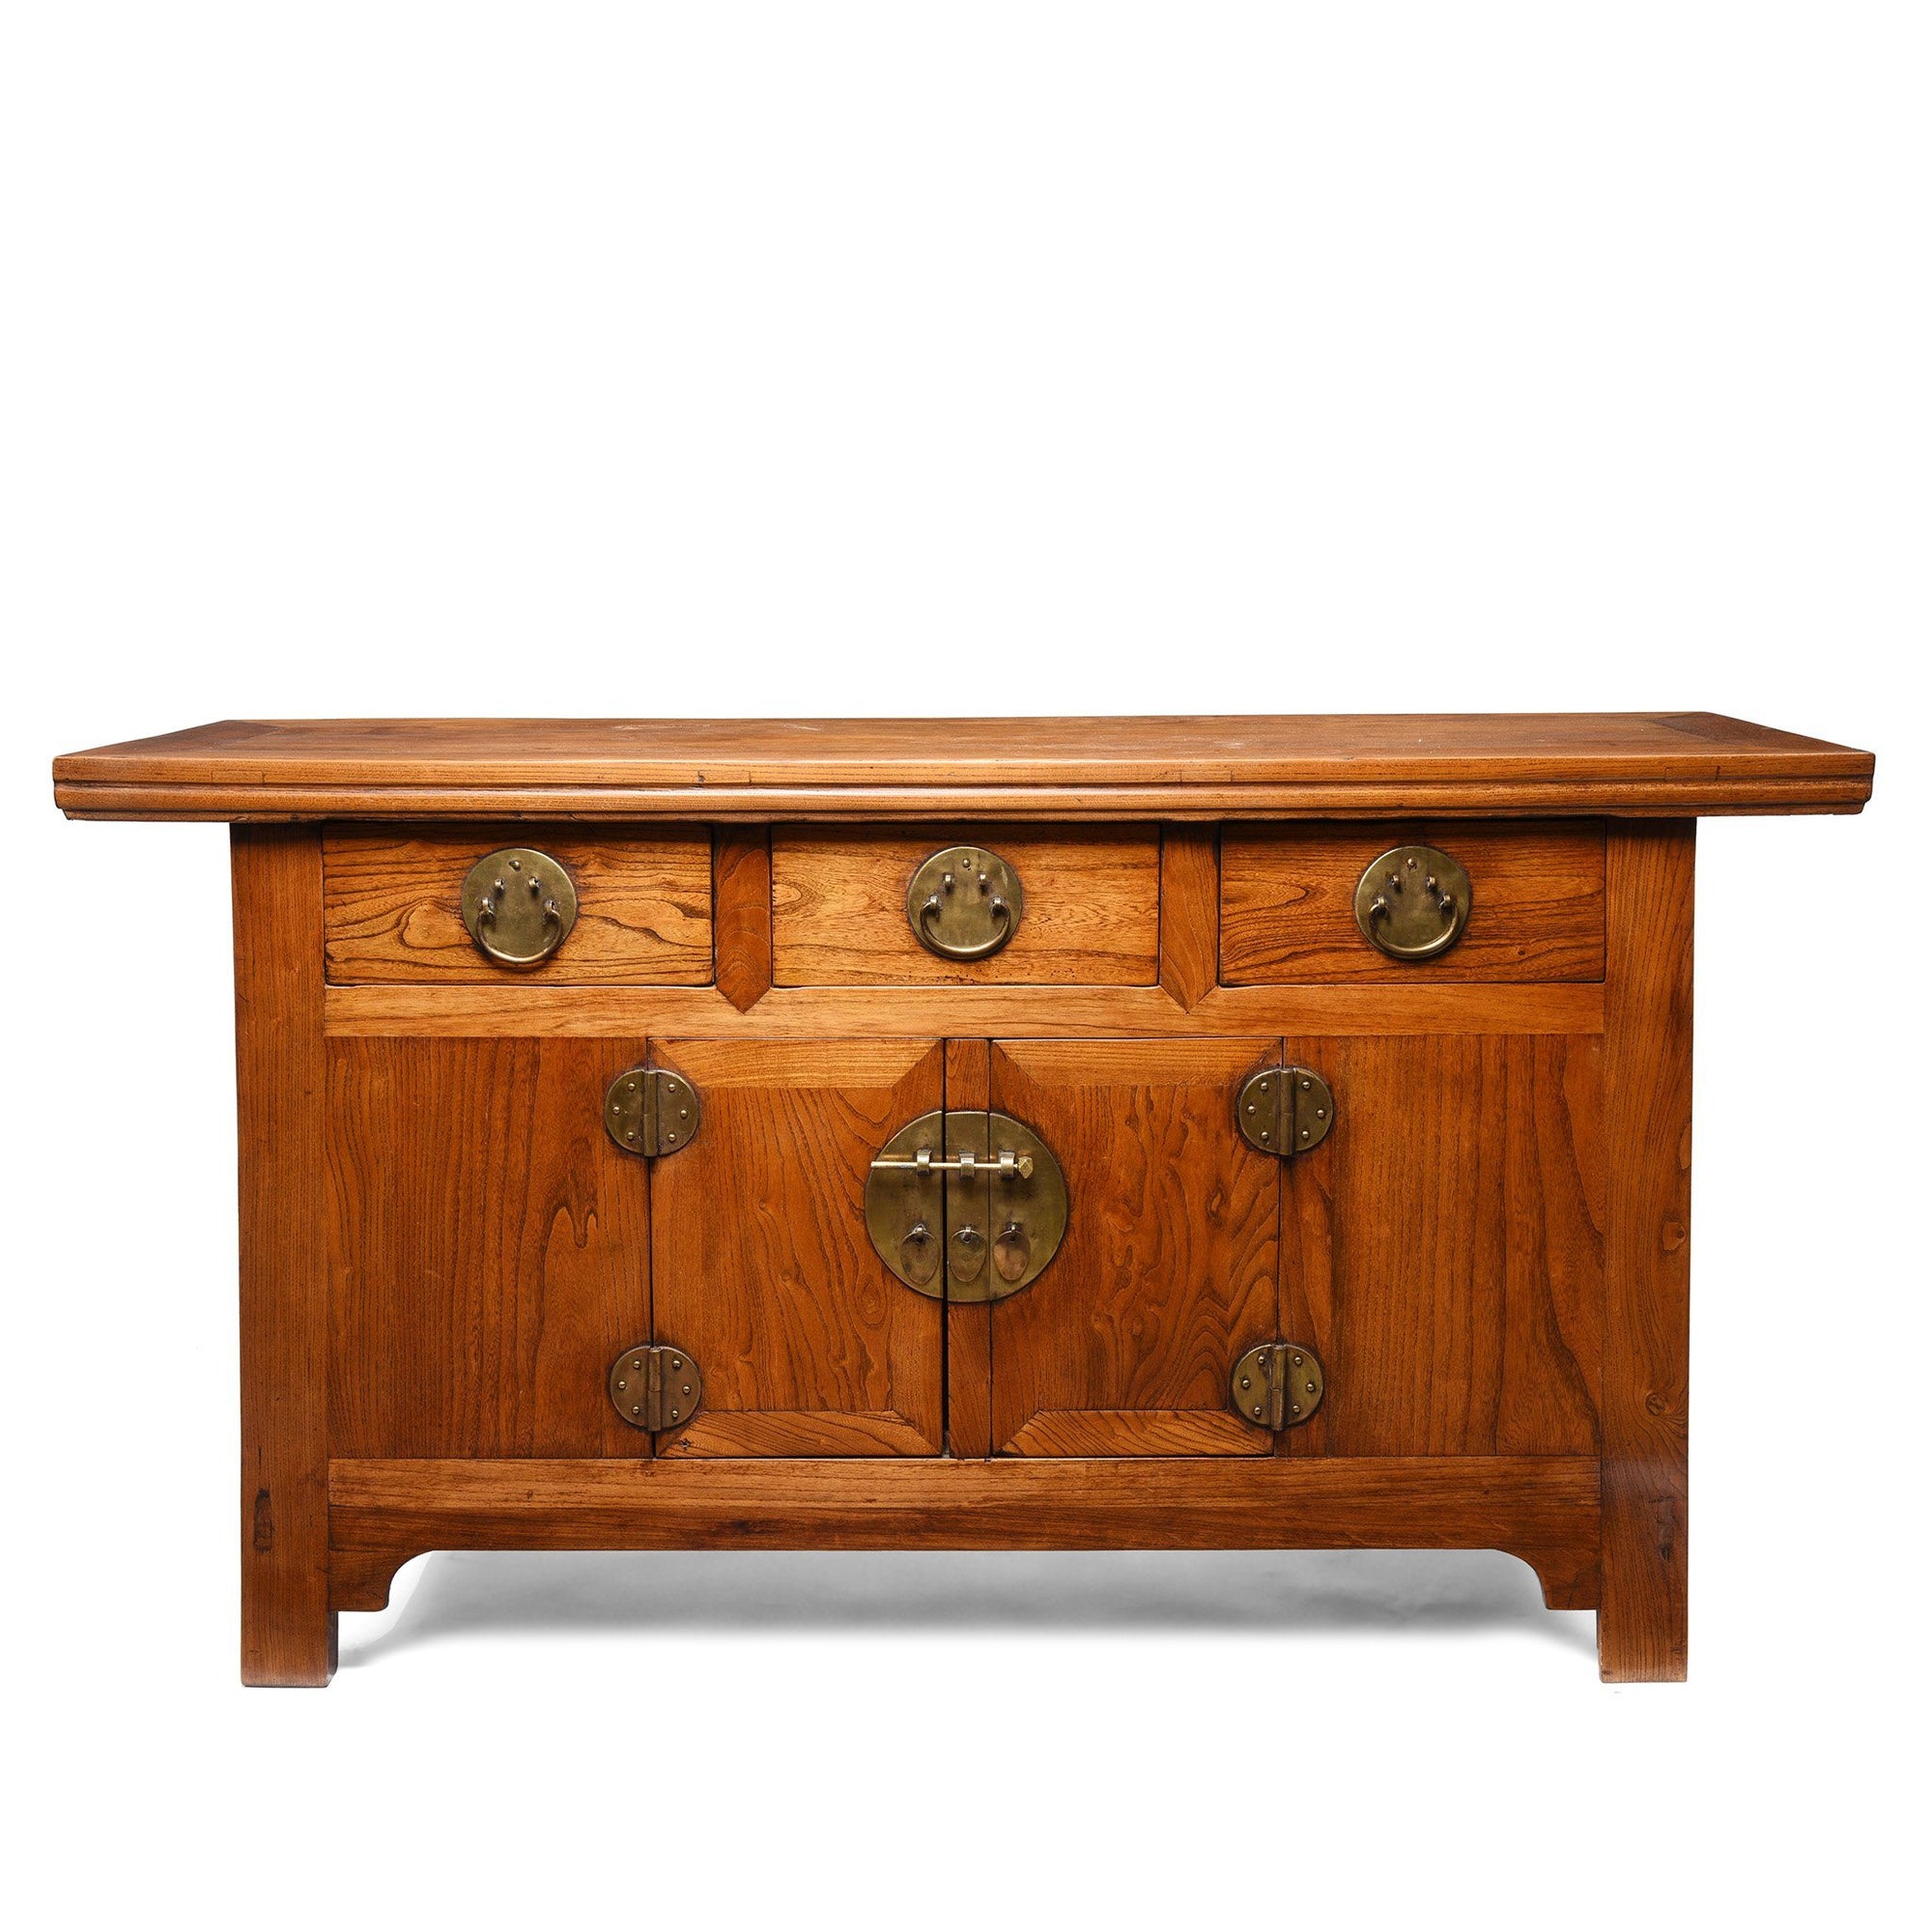 Antique Elm Chinese Sideboard From Peking - Late 19thC | Indigo Antiques